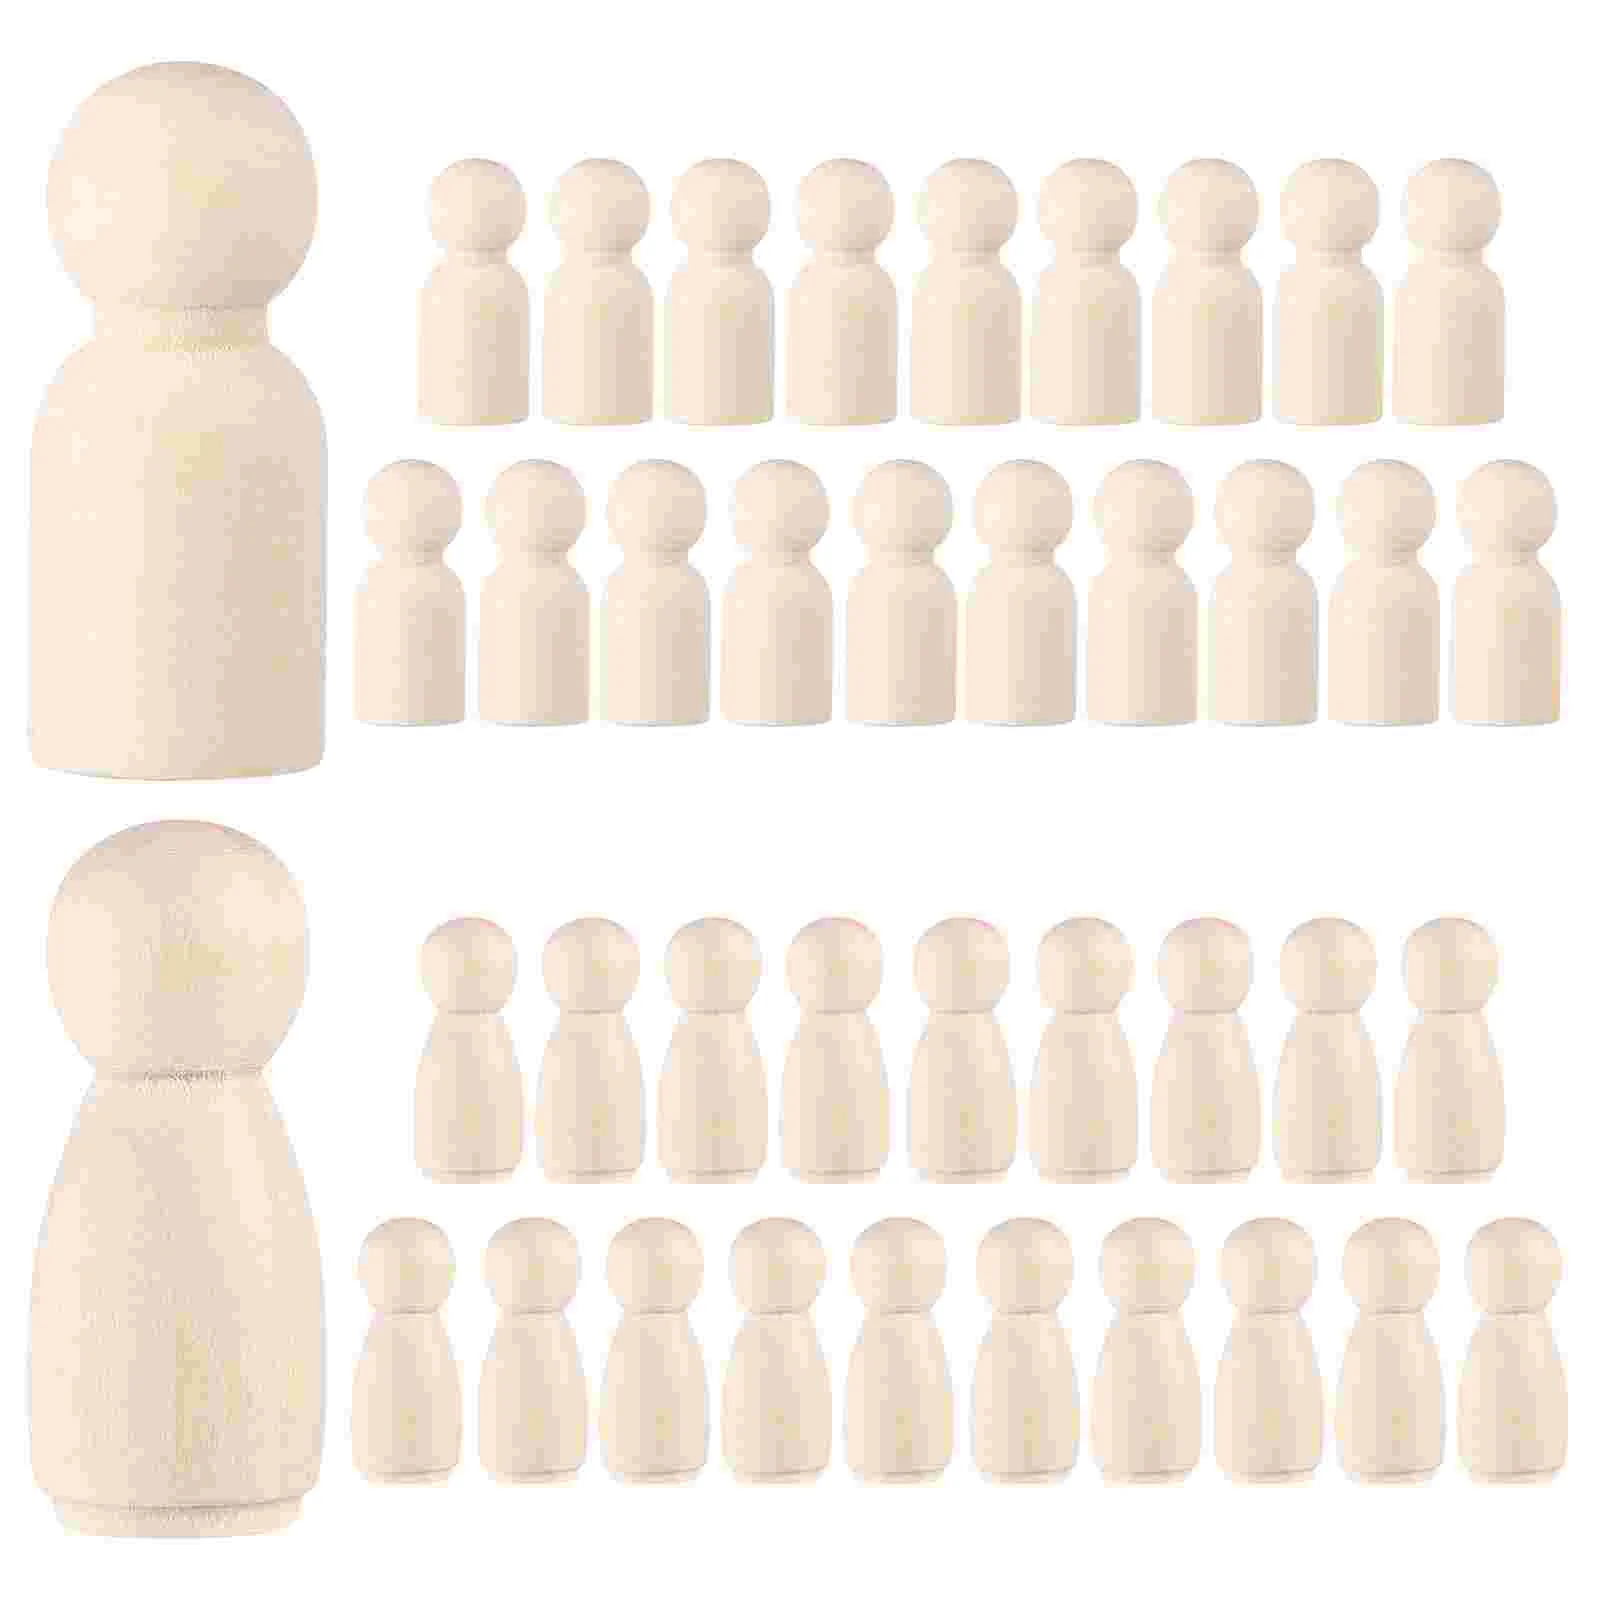 

Peg Wooden People Wood Crafts Unfinished Pegs Figures Diy Craft Bodies Painting Painted Kit Kids Christmas Game Unpainted Toy